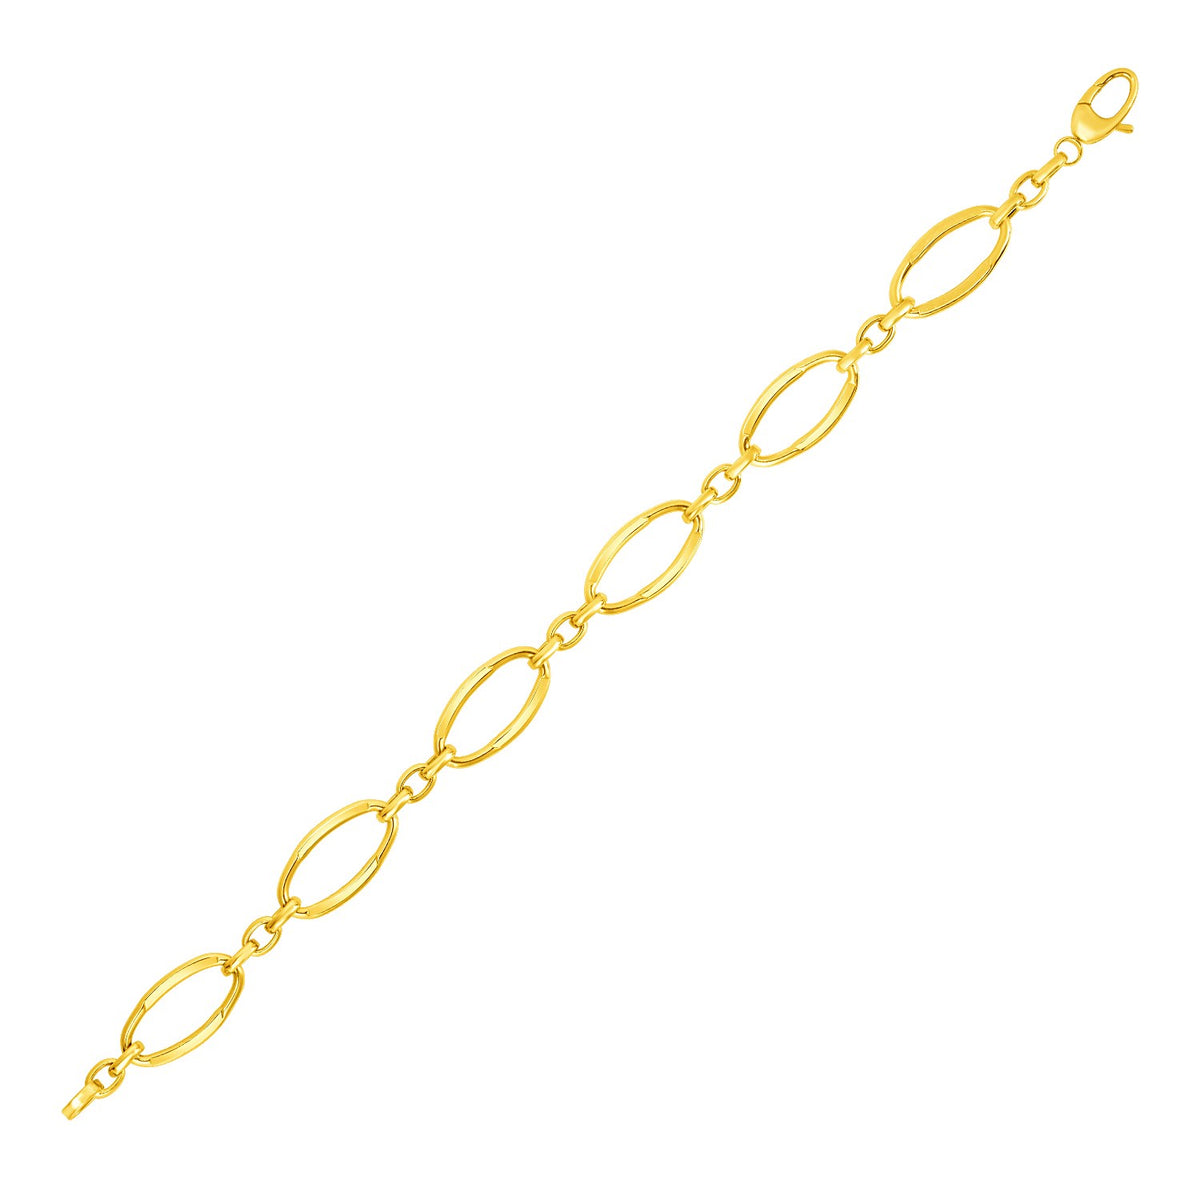 Bracelet with Polished Oval Links - 14k Yellow Gold 10.00mm